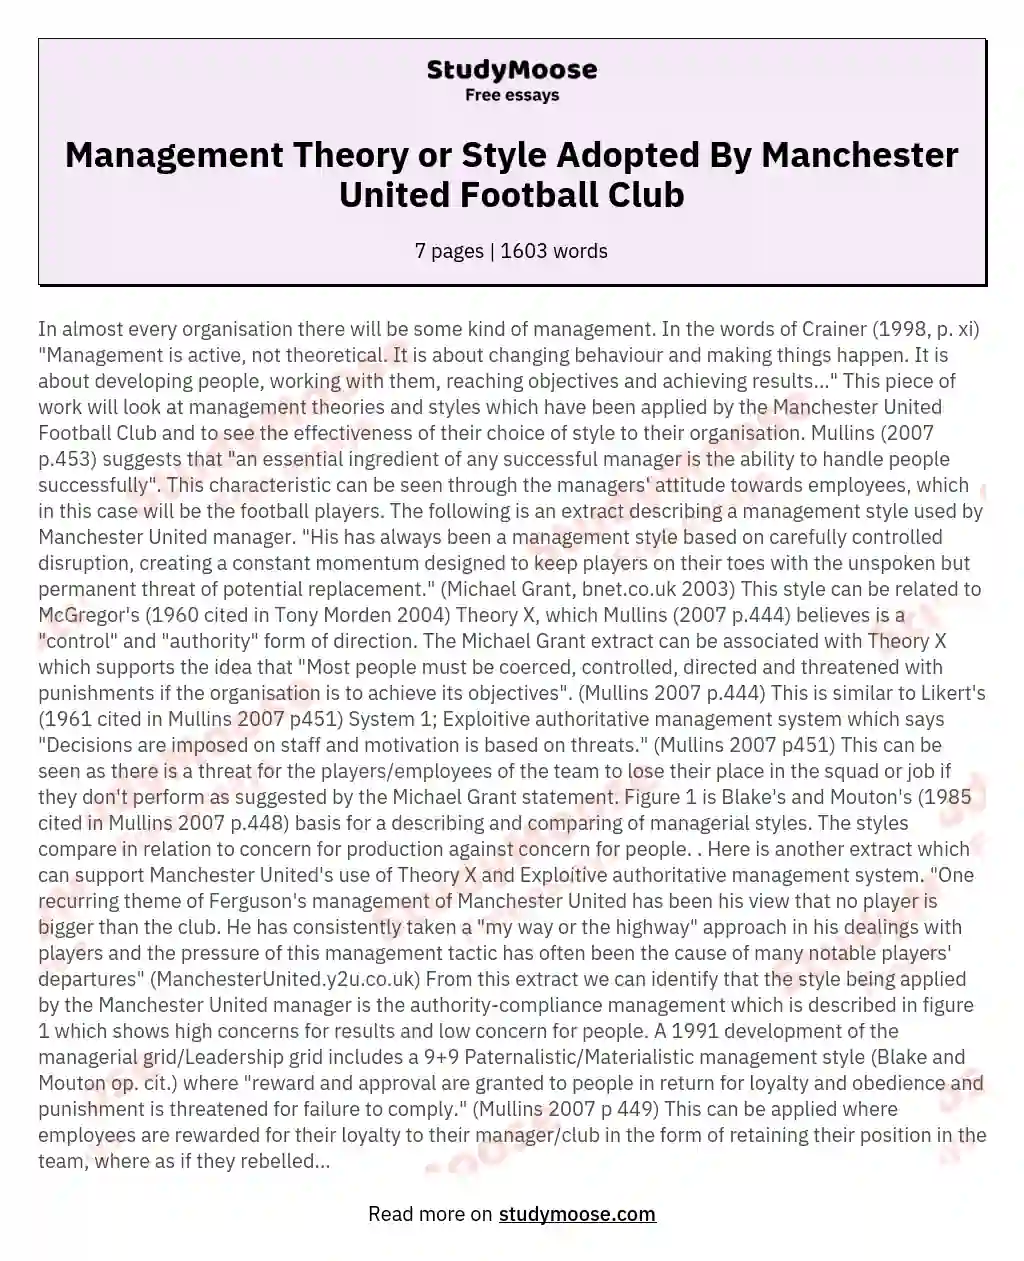 Management Theory or Style Adopted By Manchester United Football Club